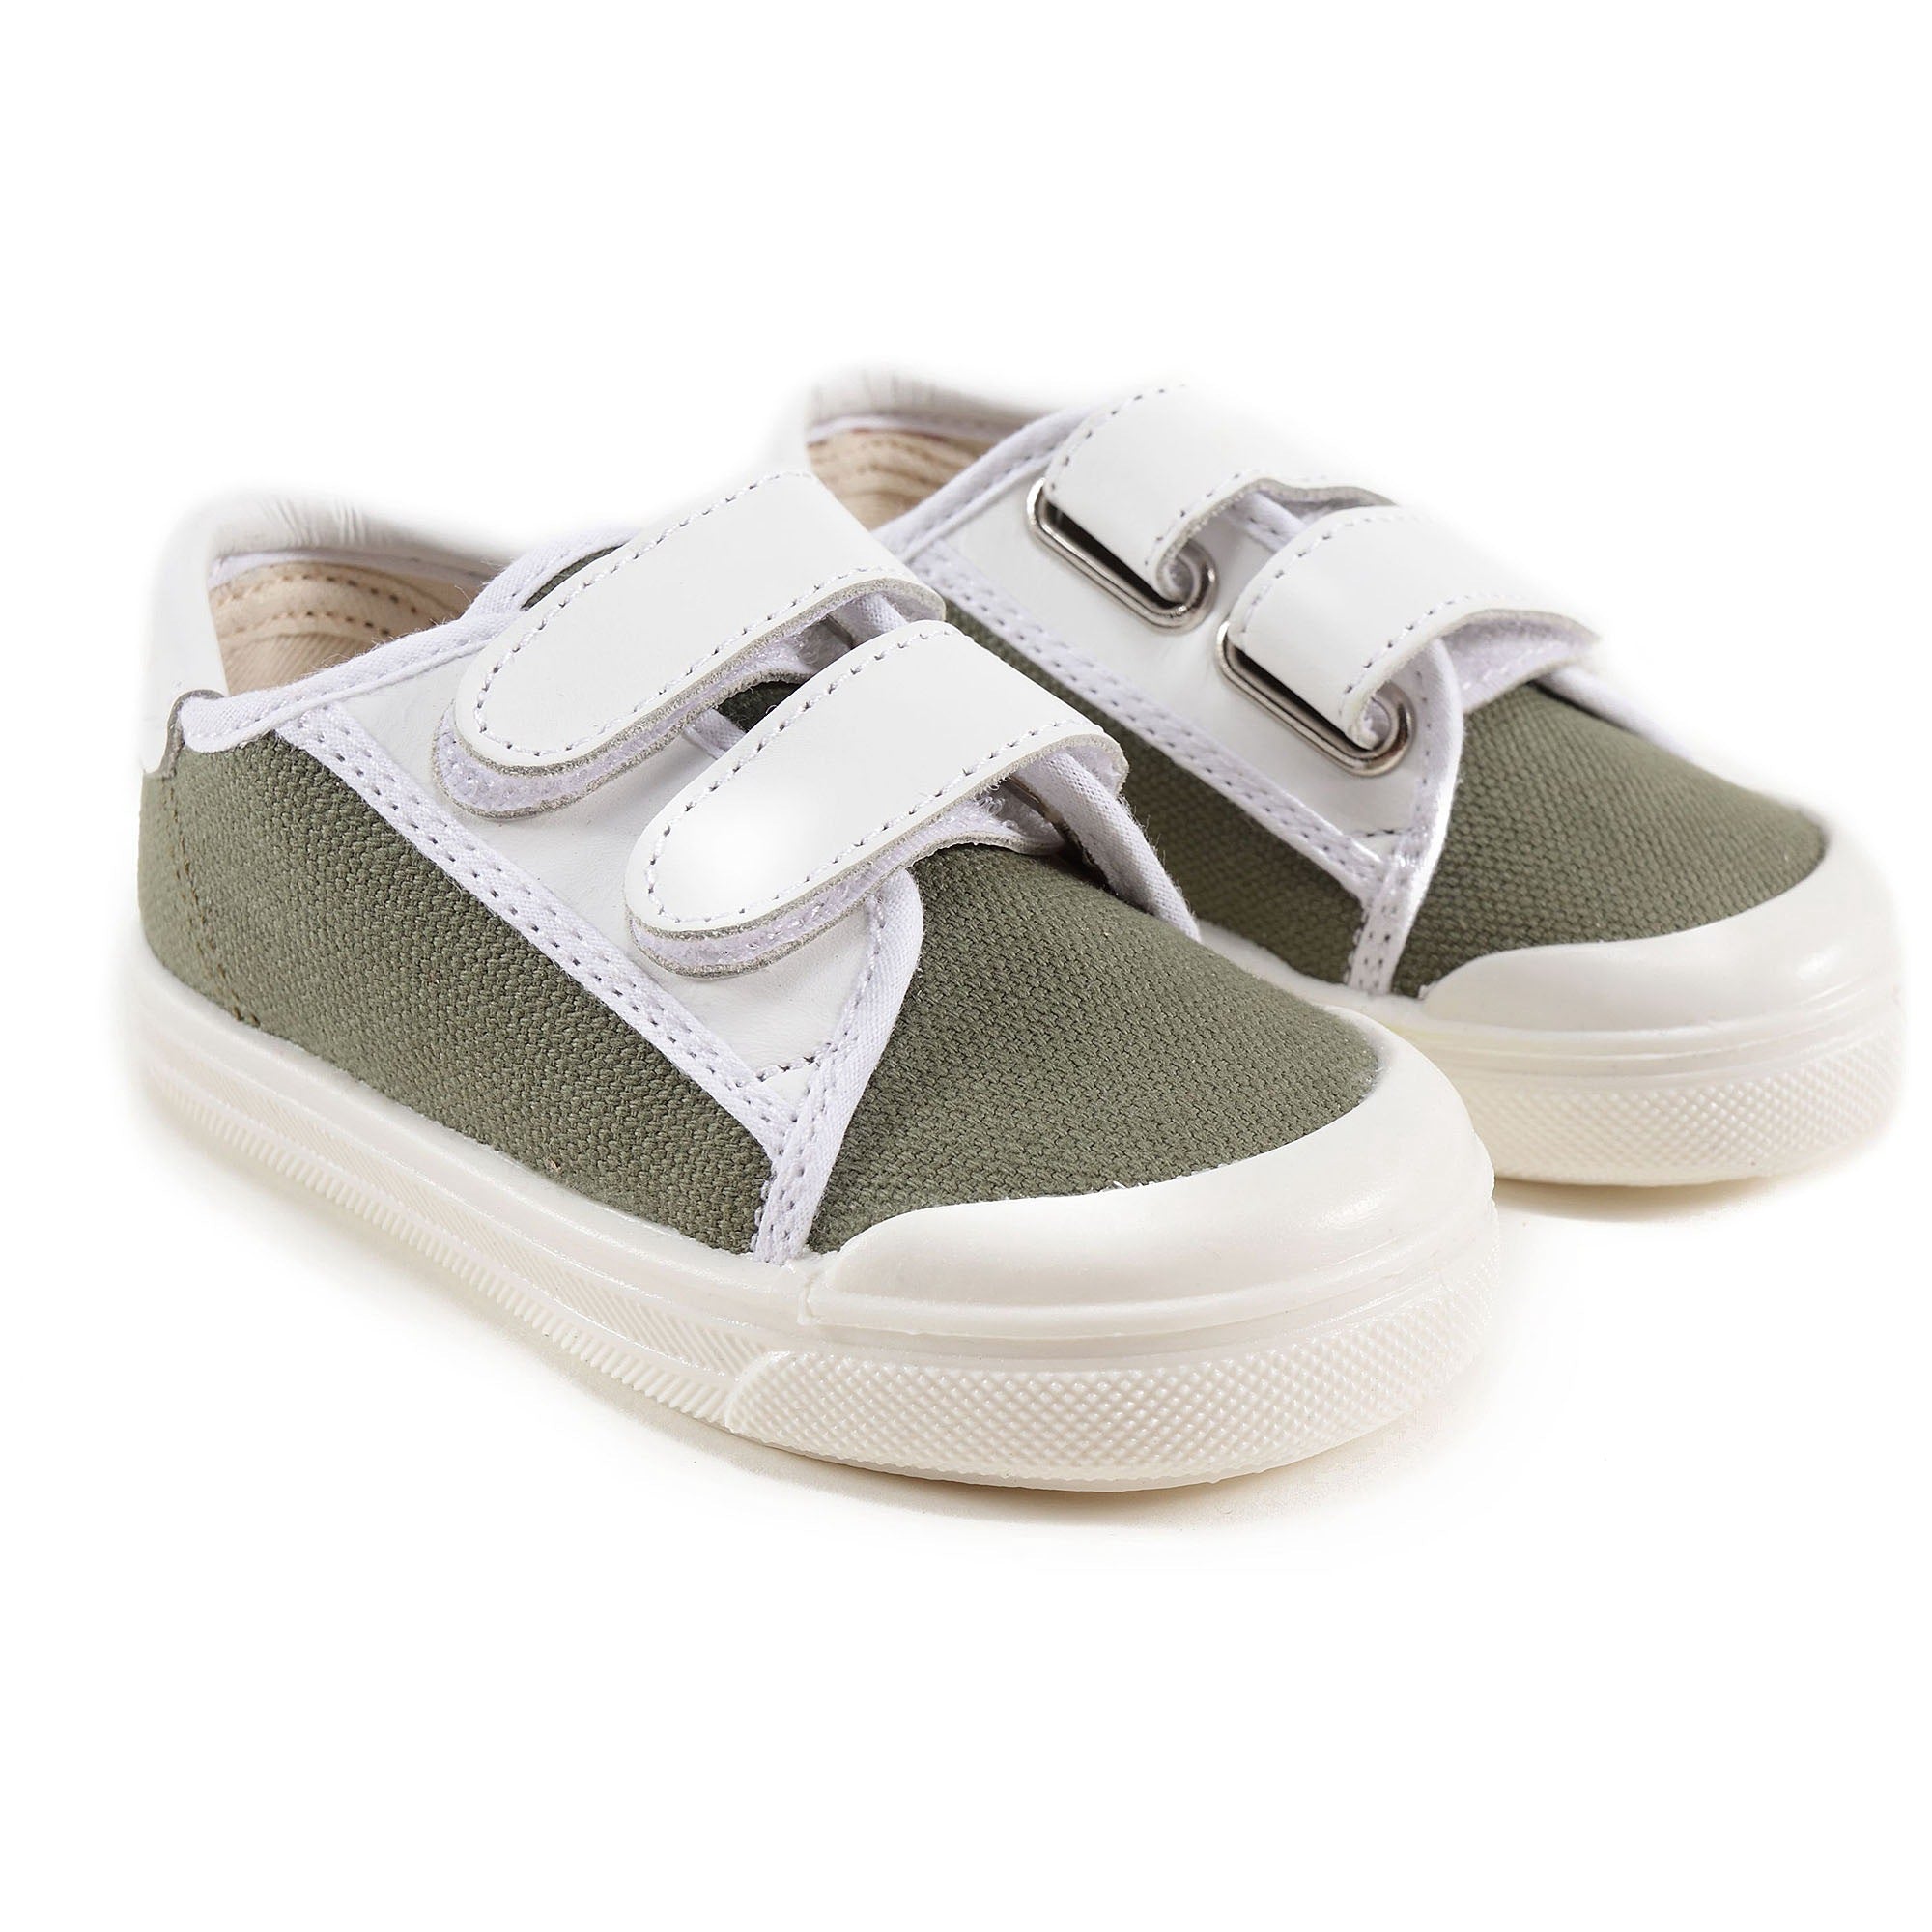 Boys & Girls Green Canvas Shoes